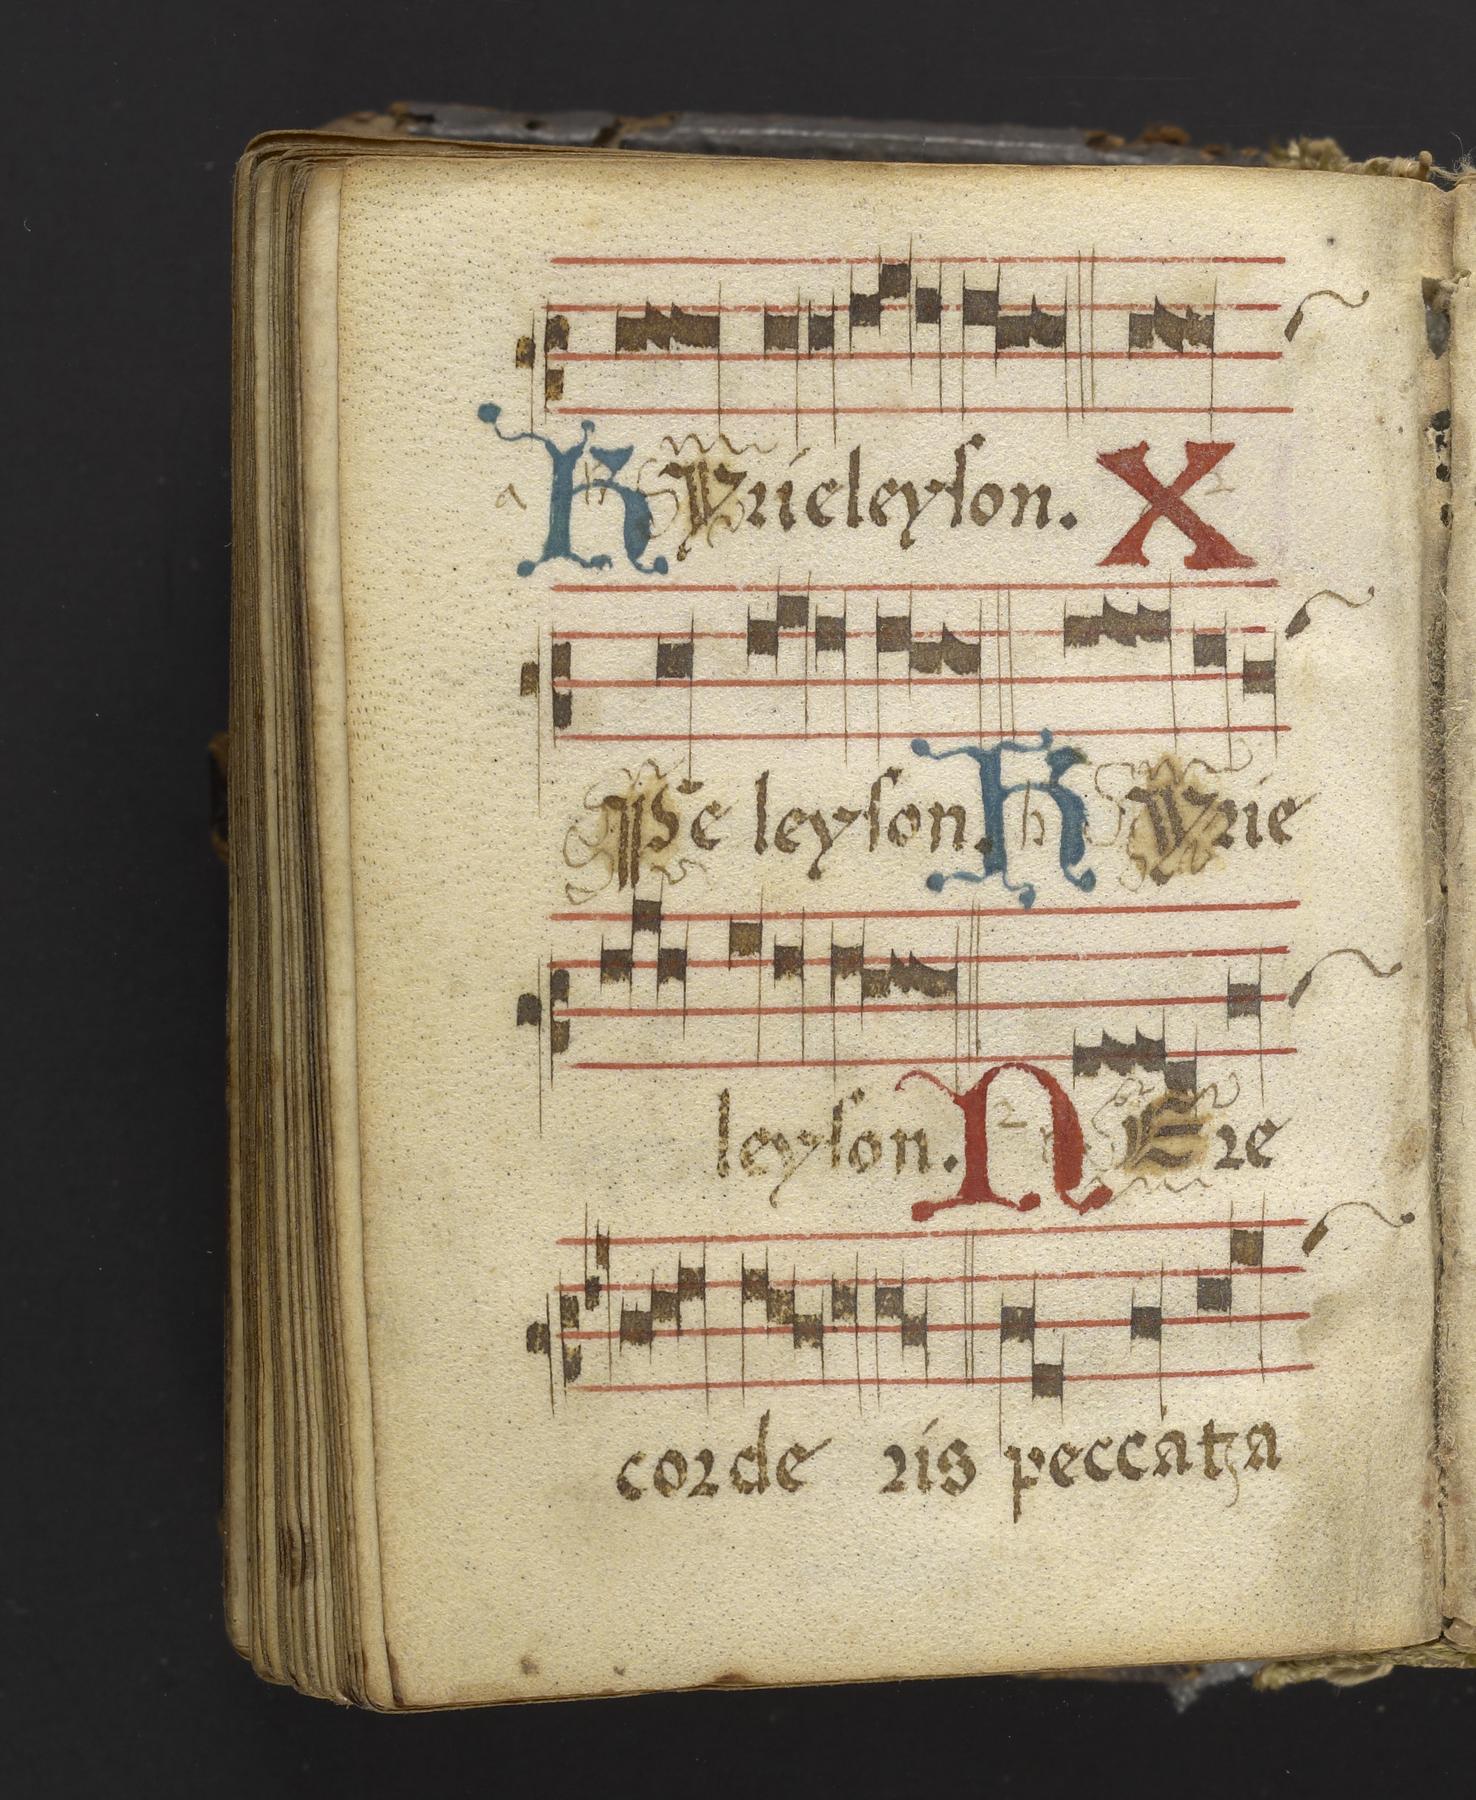 Coffee with a Codex: Liturgical miscellany